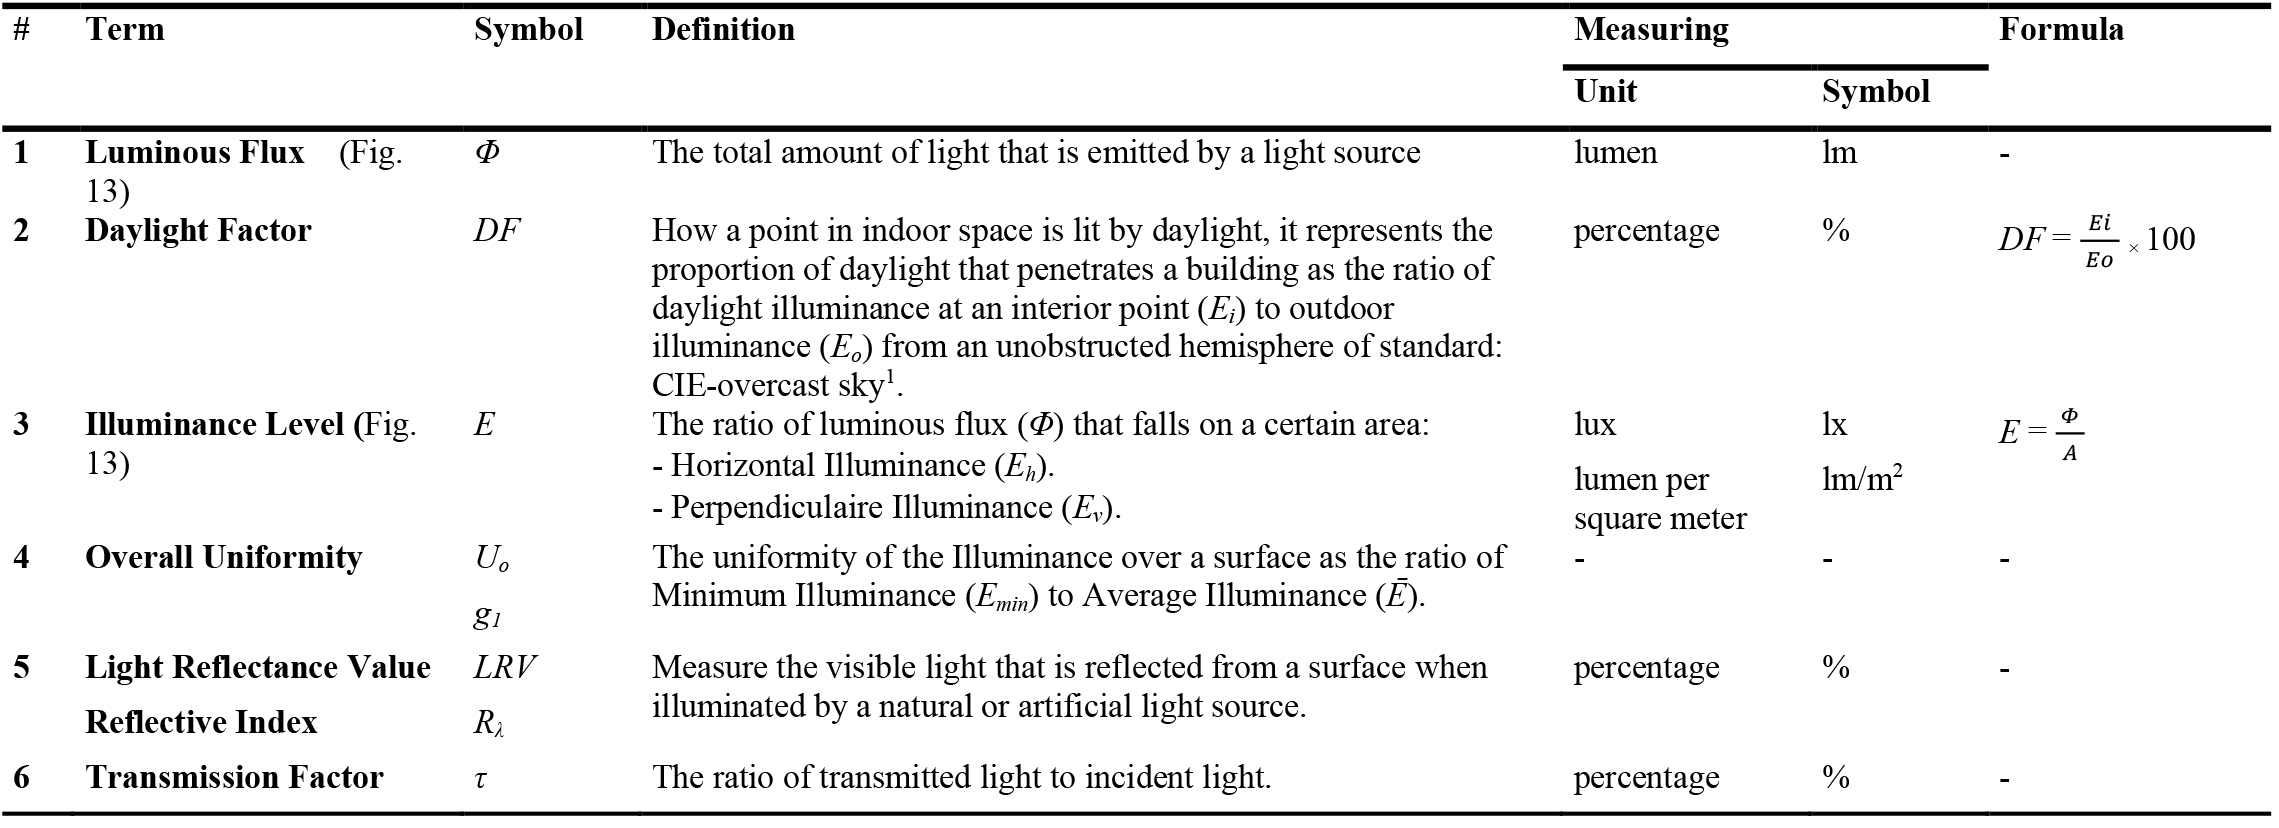 Lighting terms and definitions.